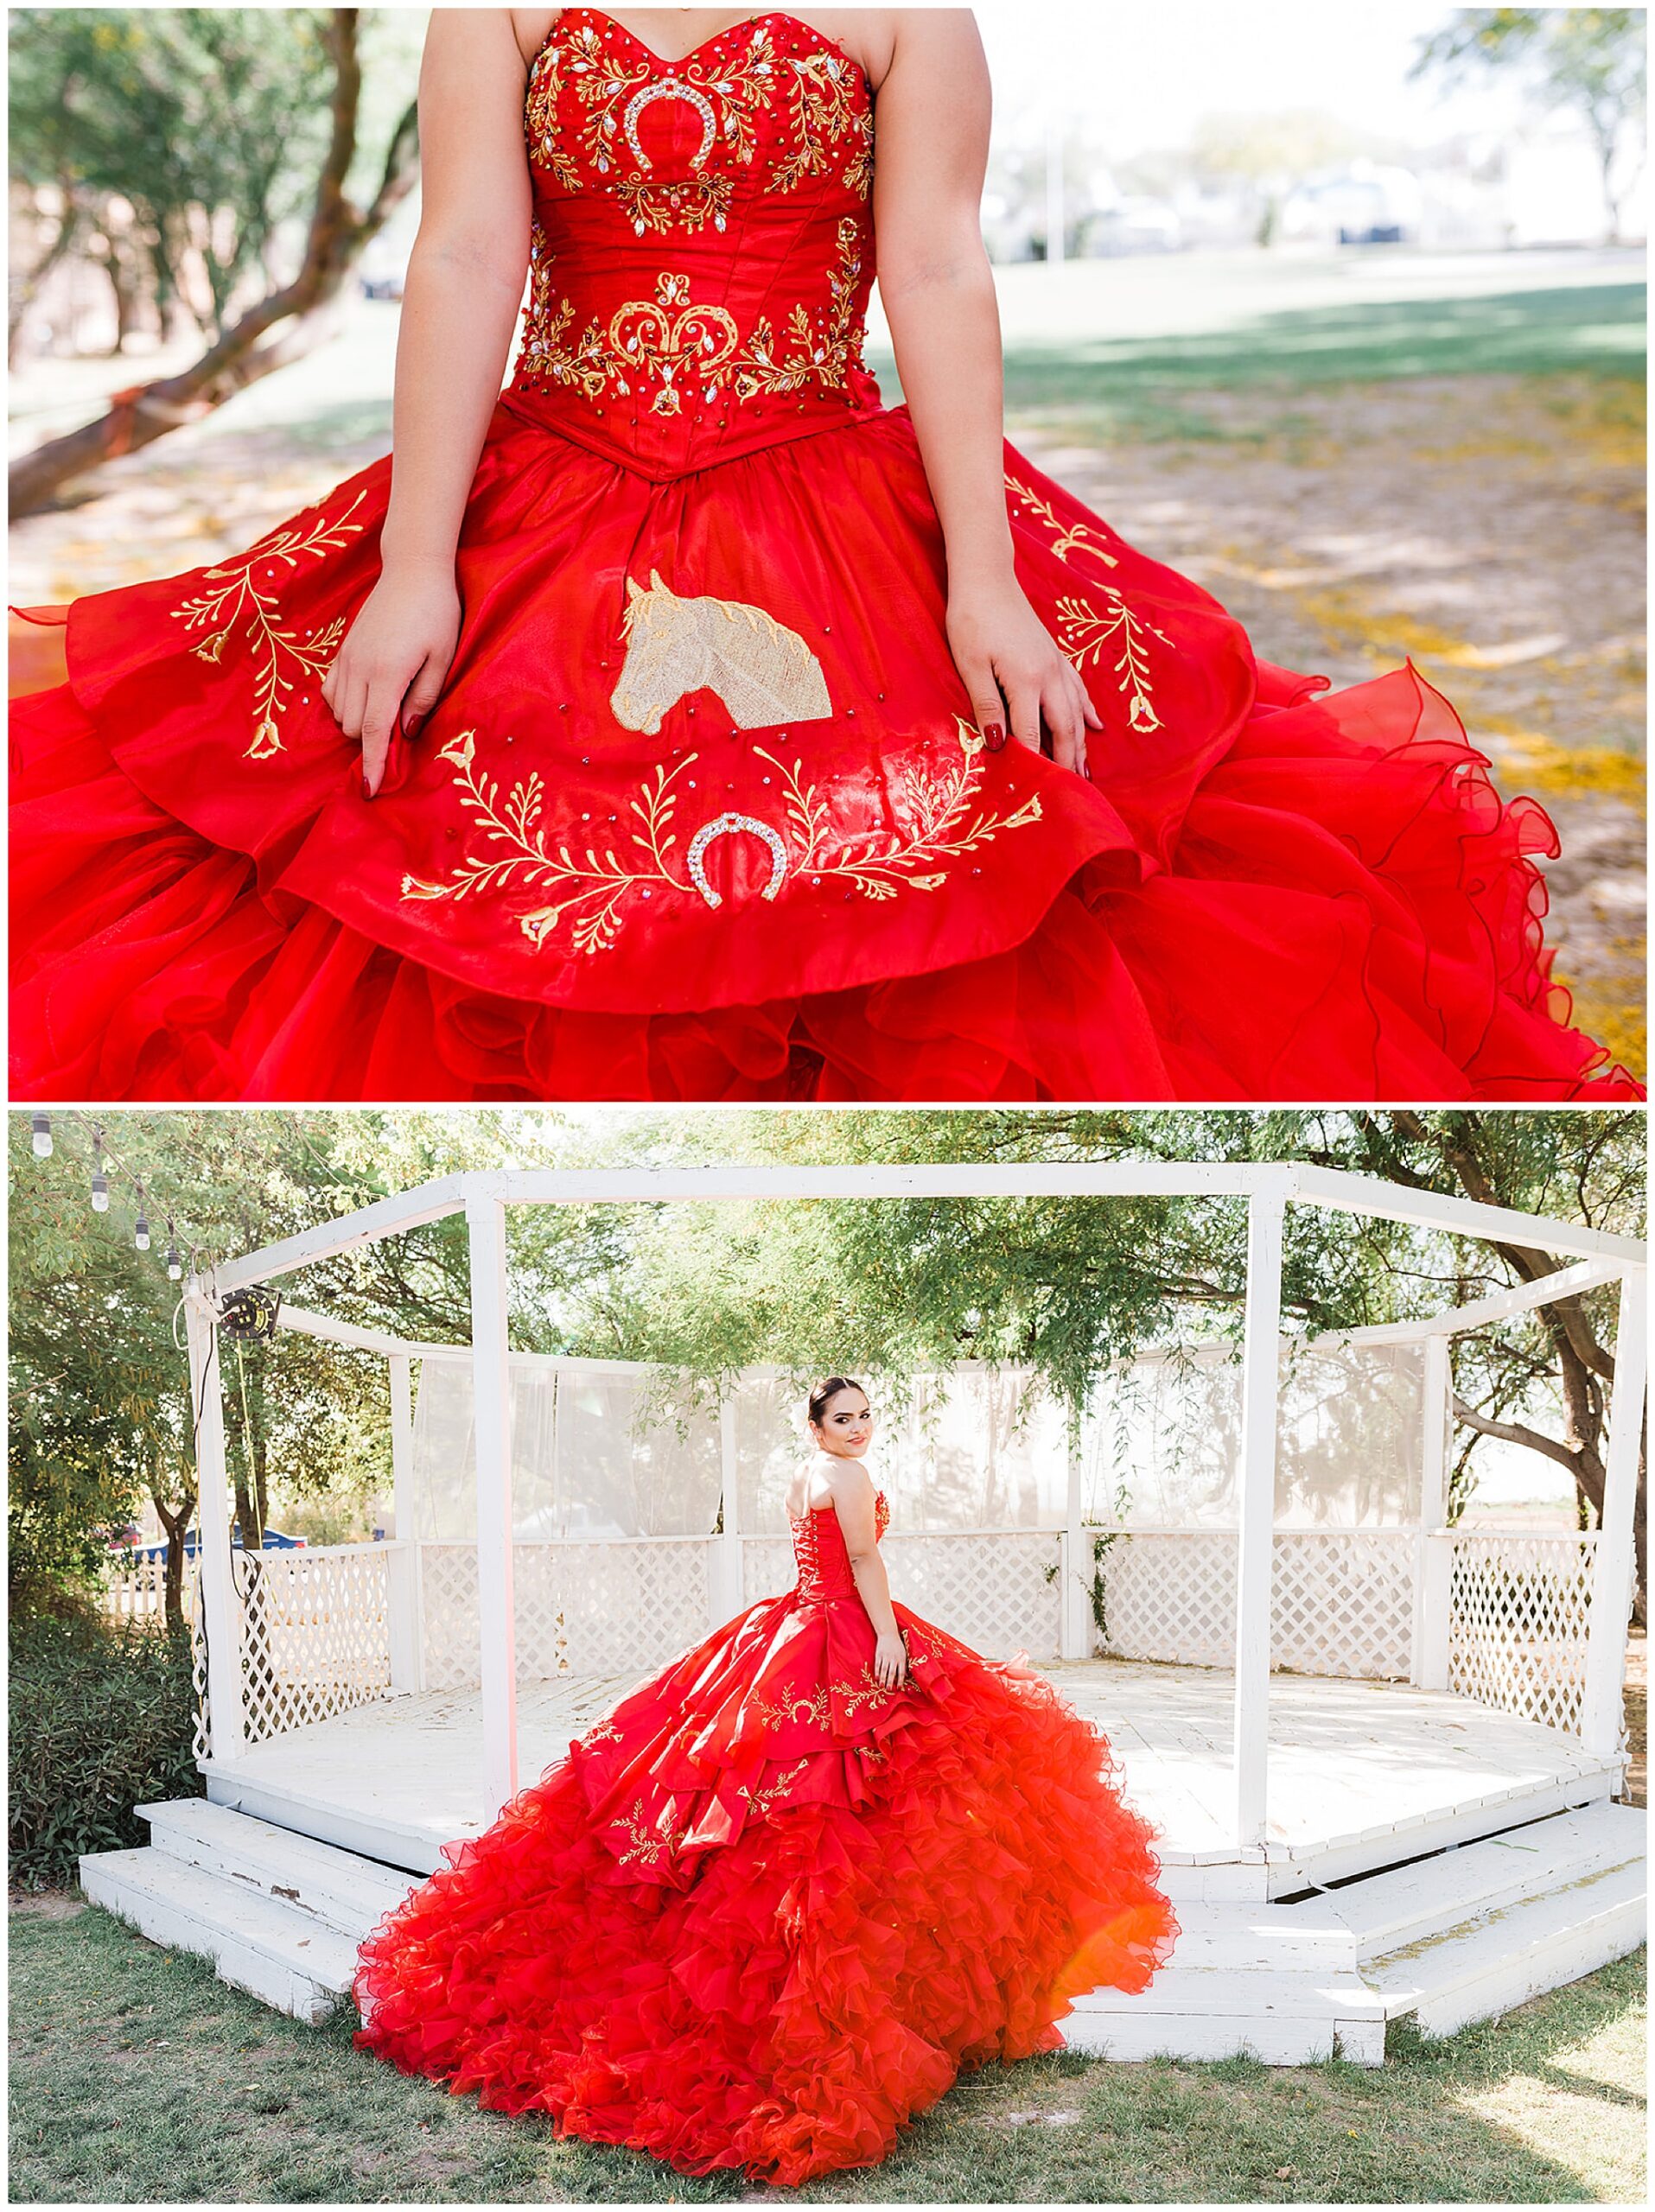 Teenager stands in a field in a red dress with gold horse themed embroidery Phoenix Quinceaneras dresses